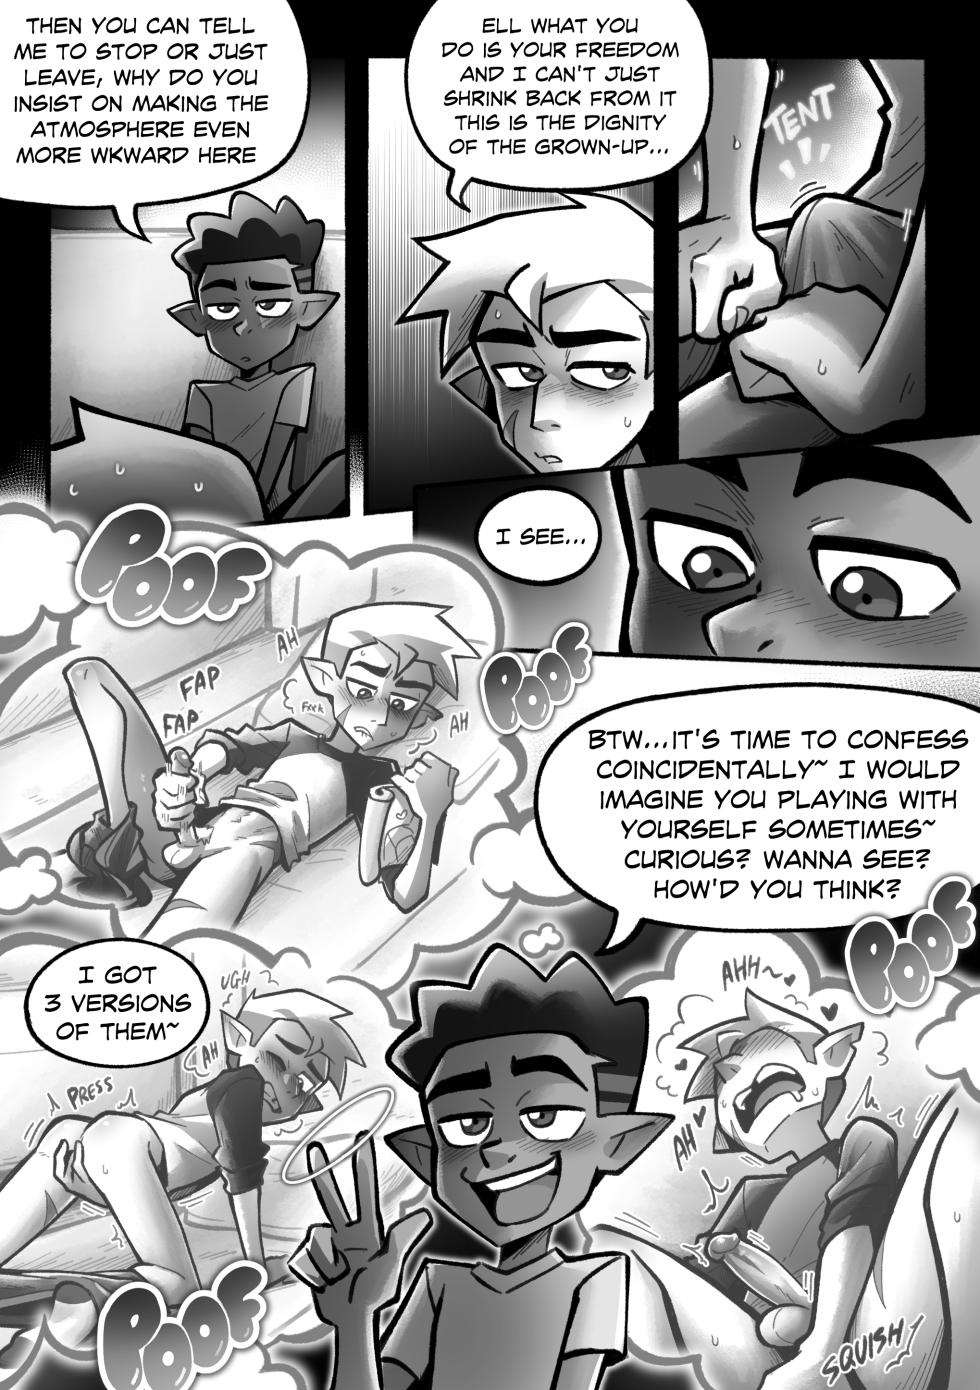 [Kimchi] "Guster" Sleepover - The Owl House - Page 35